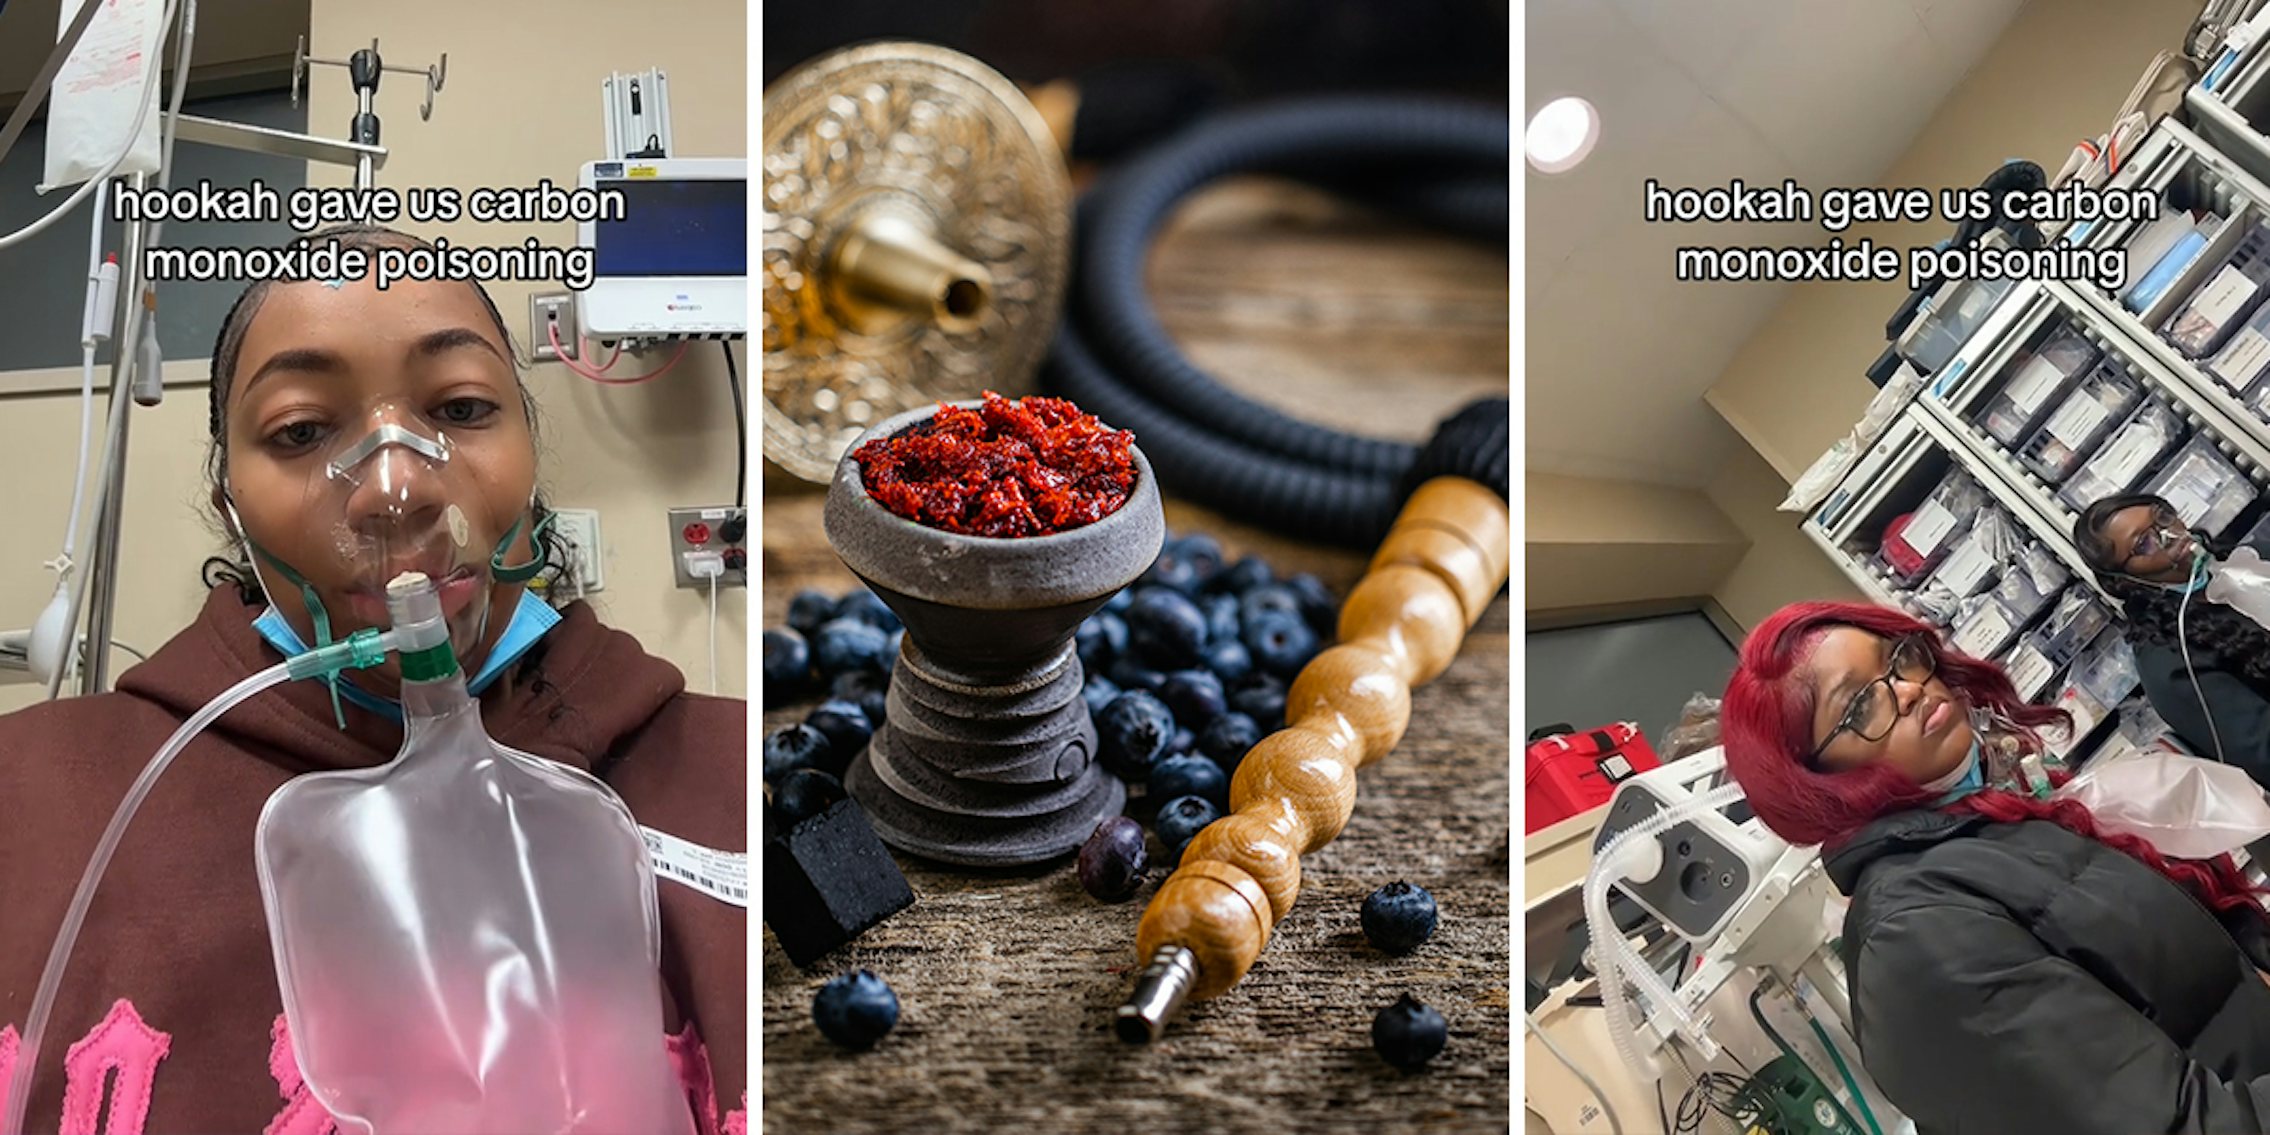 woman in hospital with caption 'hookah gave us carbon monoxide poisoning' (l) hookah with fruit tobacco on table (c) women in hospital with caption 'hookah gave us carbon monoxide poisoning' (r)